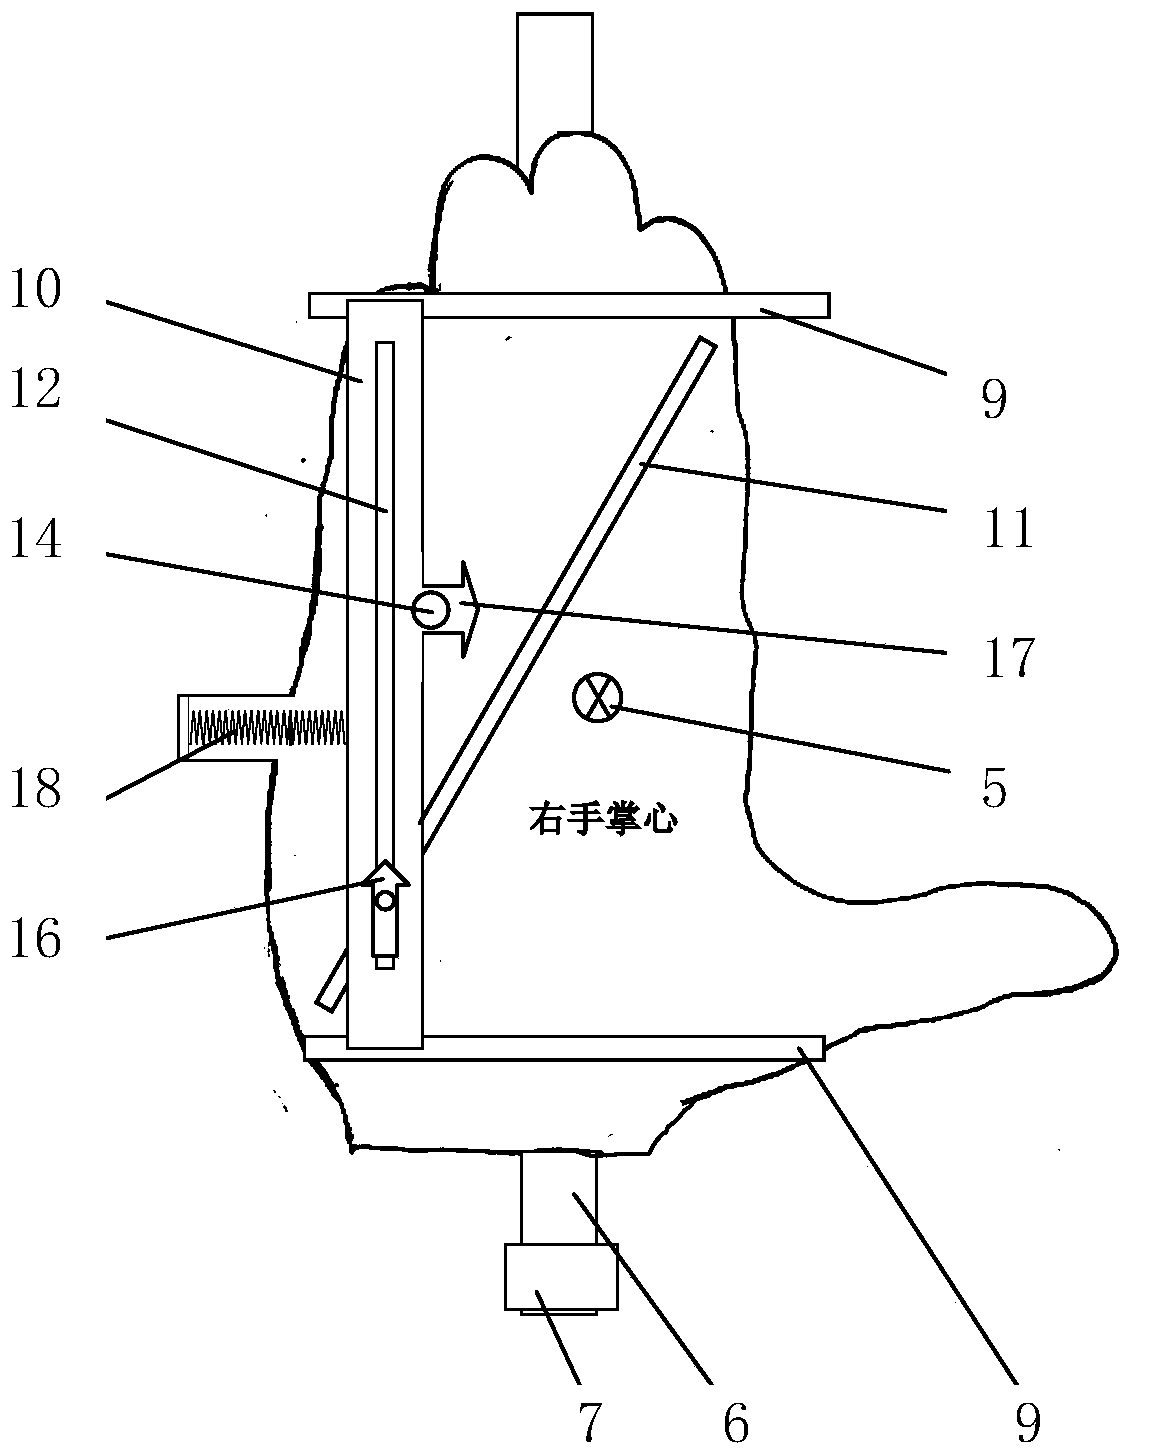 Electrical left-right hand rule demonstrator